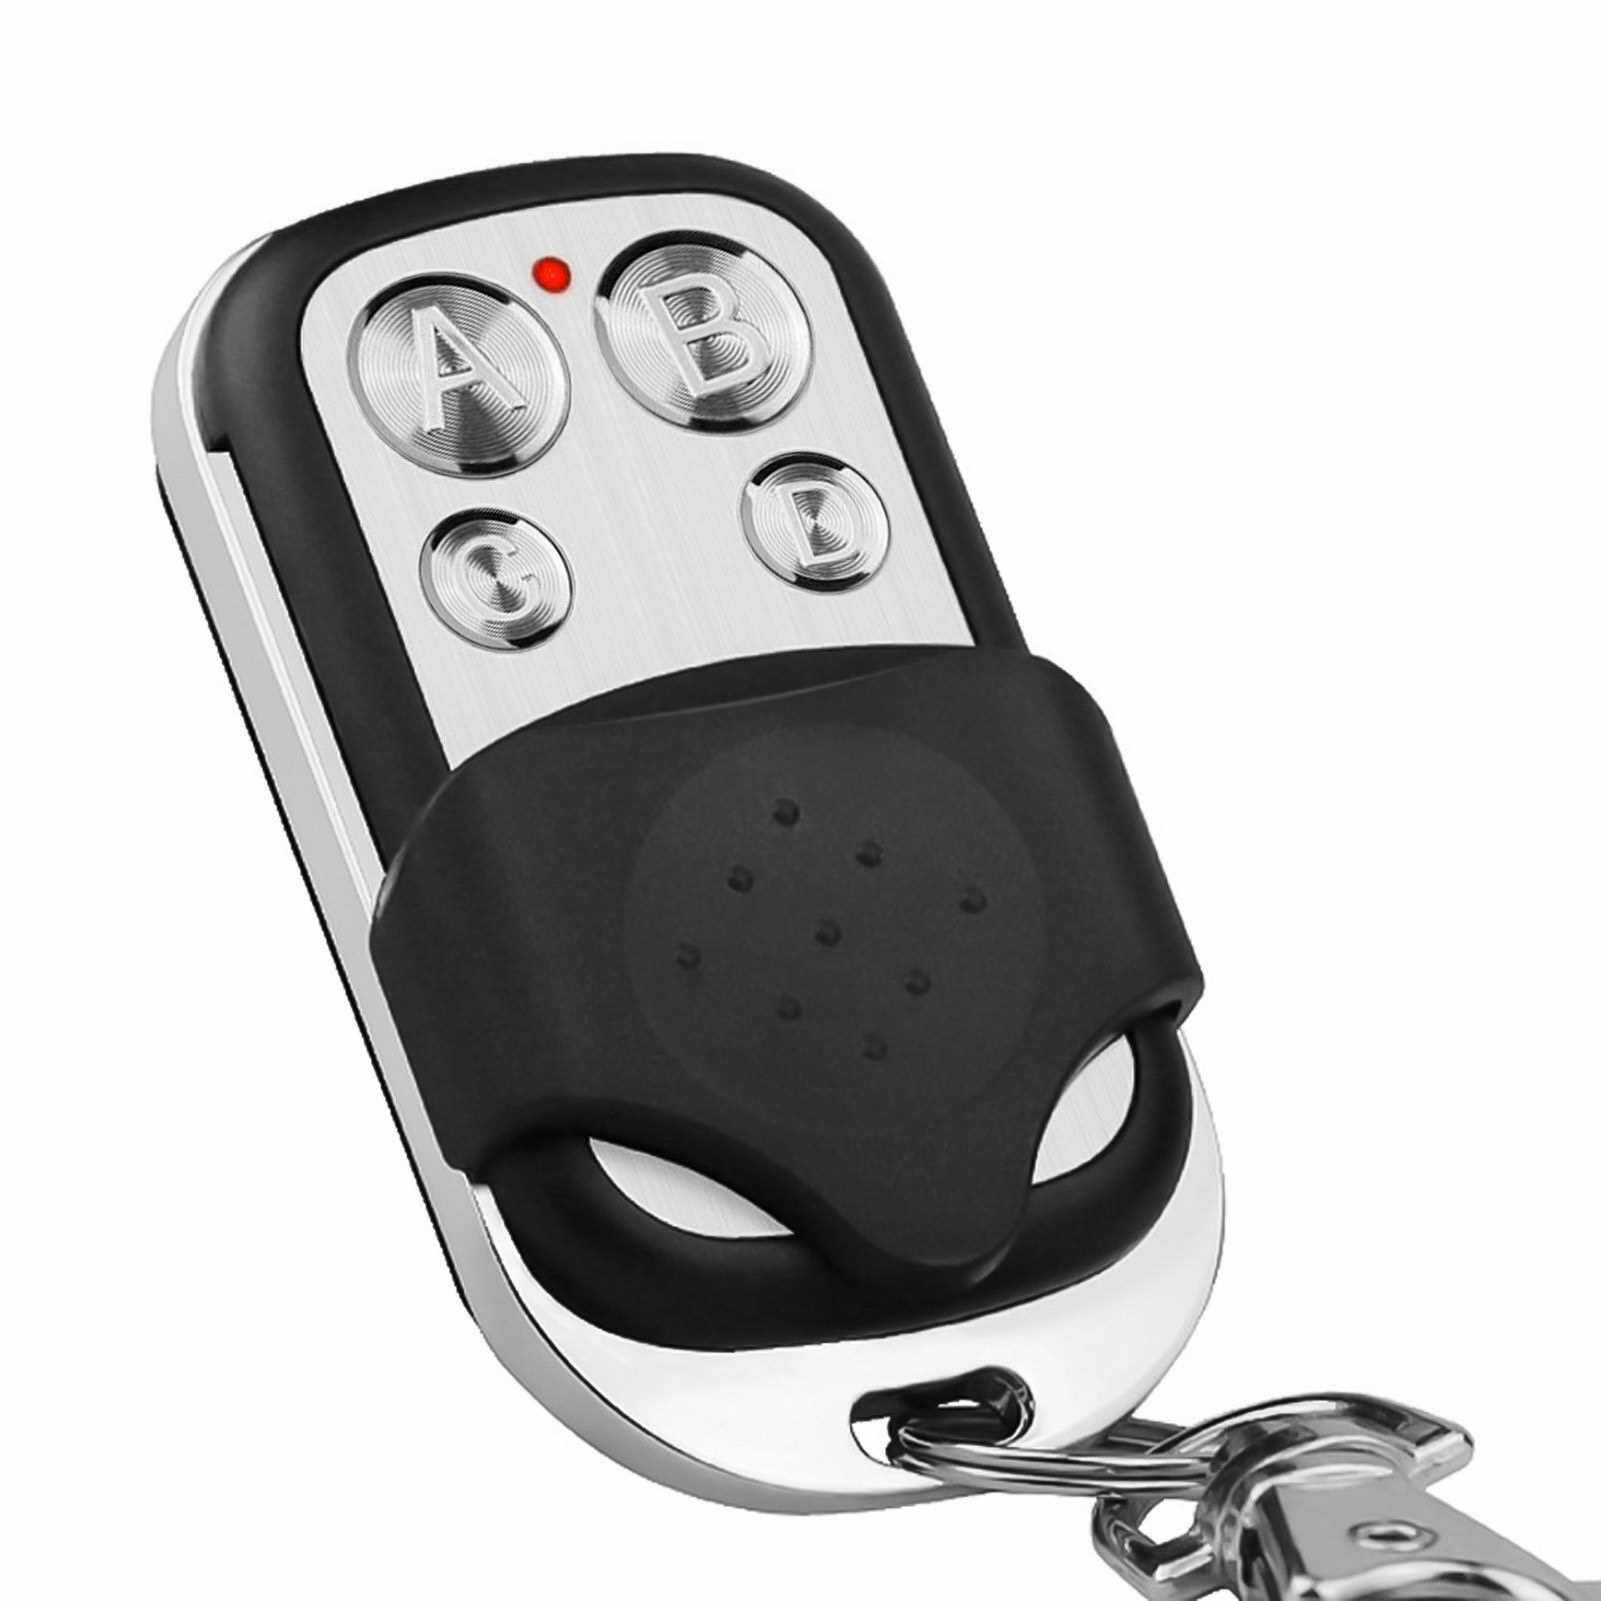 BEST SELLER 418MHz Copy Remote Controller Metal Clone Remotes 4 Buttons Cloning Key Fob Garage Duplicator Remote Control Key Fob with Cover Protection (Type 2)